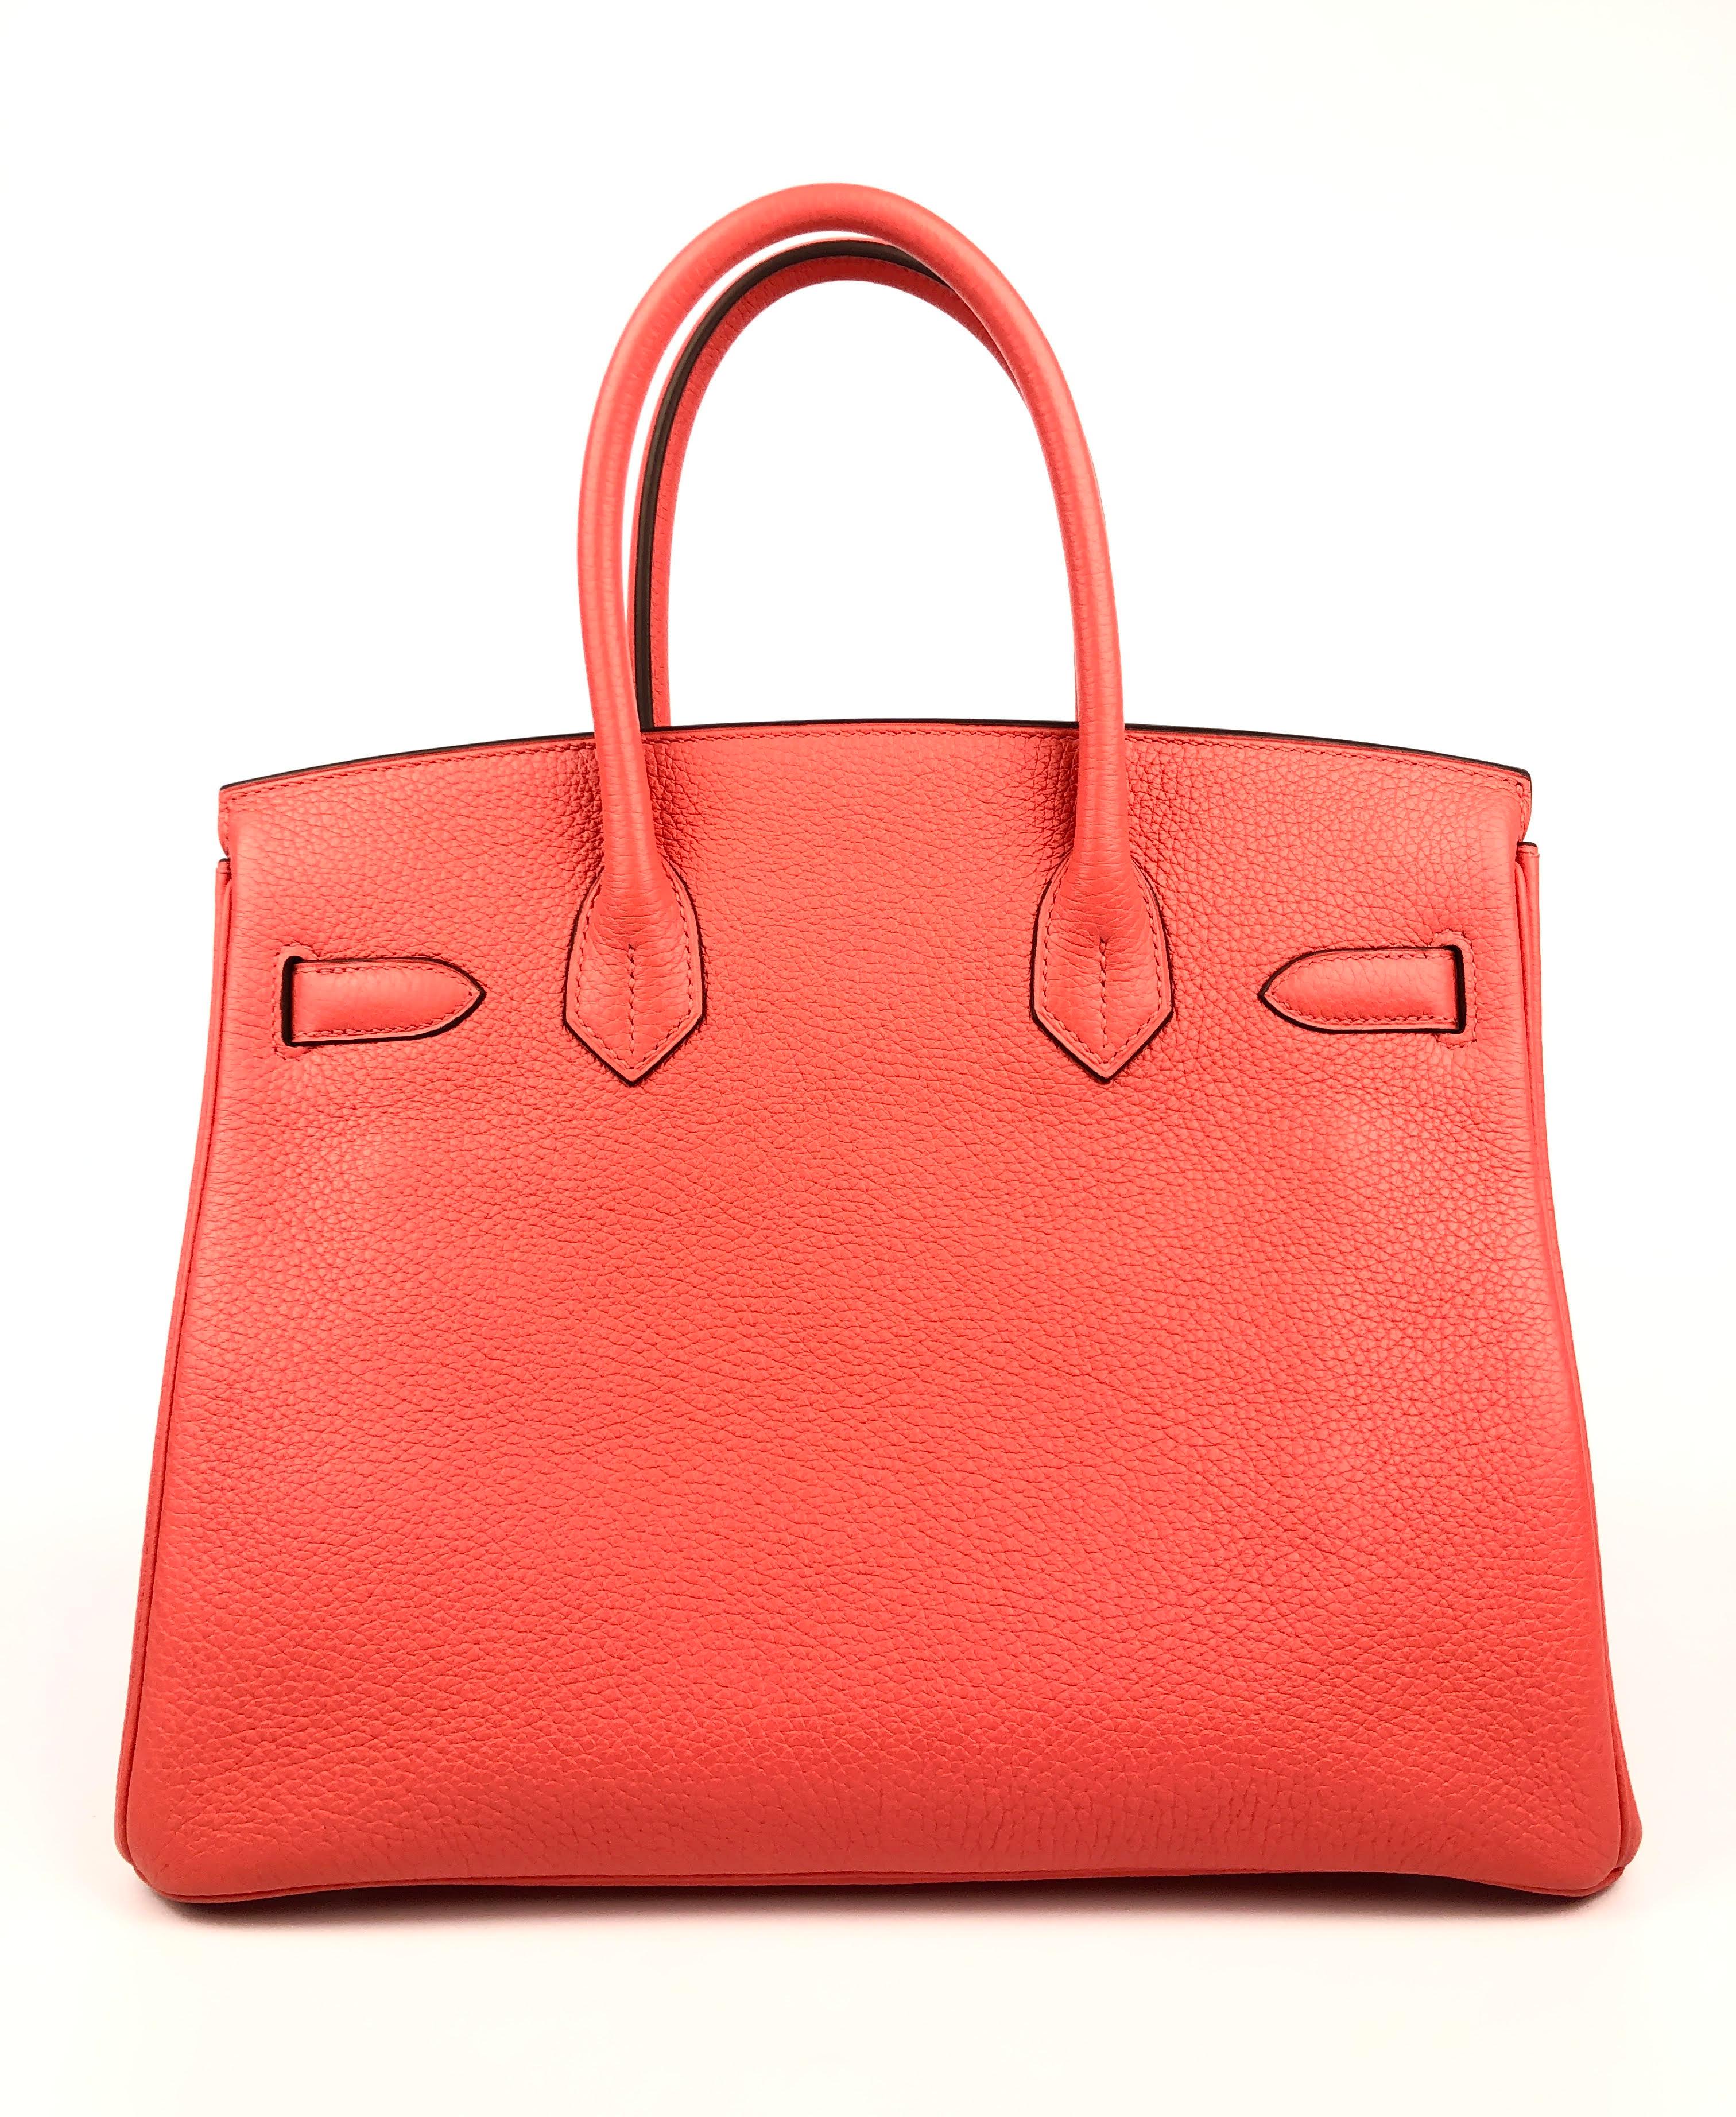 This authentic Hermès Punch Pink Red Togo 30 cm Birkin is in pristine unworn condition with the protective plastic intact on the hardware.  Waitlists exceeding a year are commonplace for the intensely coveted classic leather Birkin bag.  Each piece